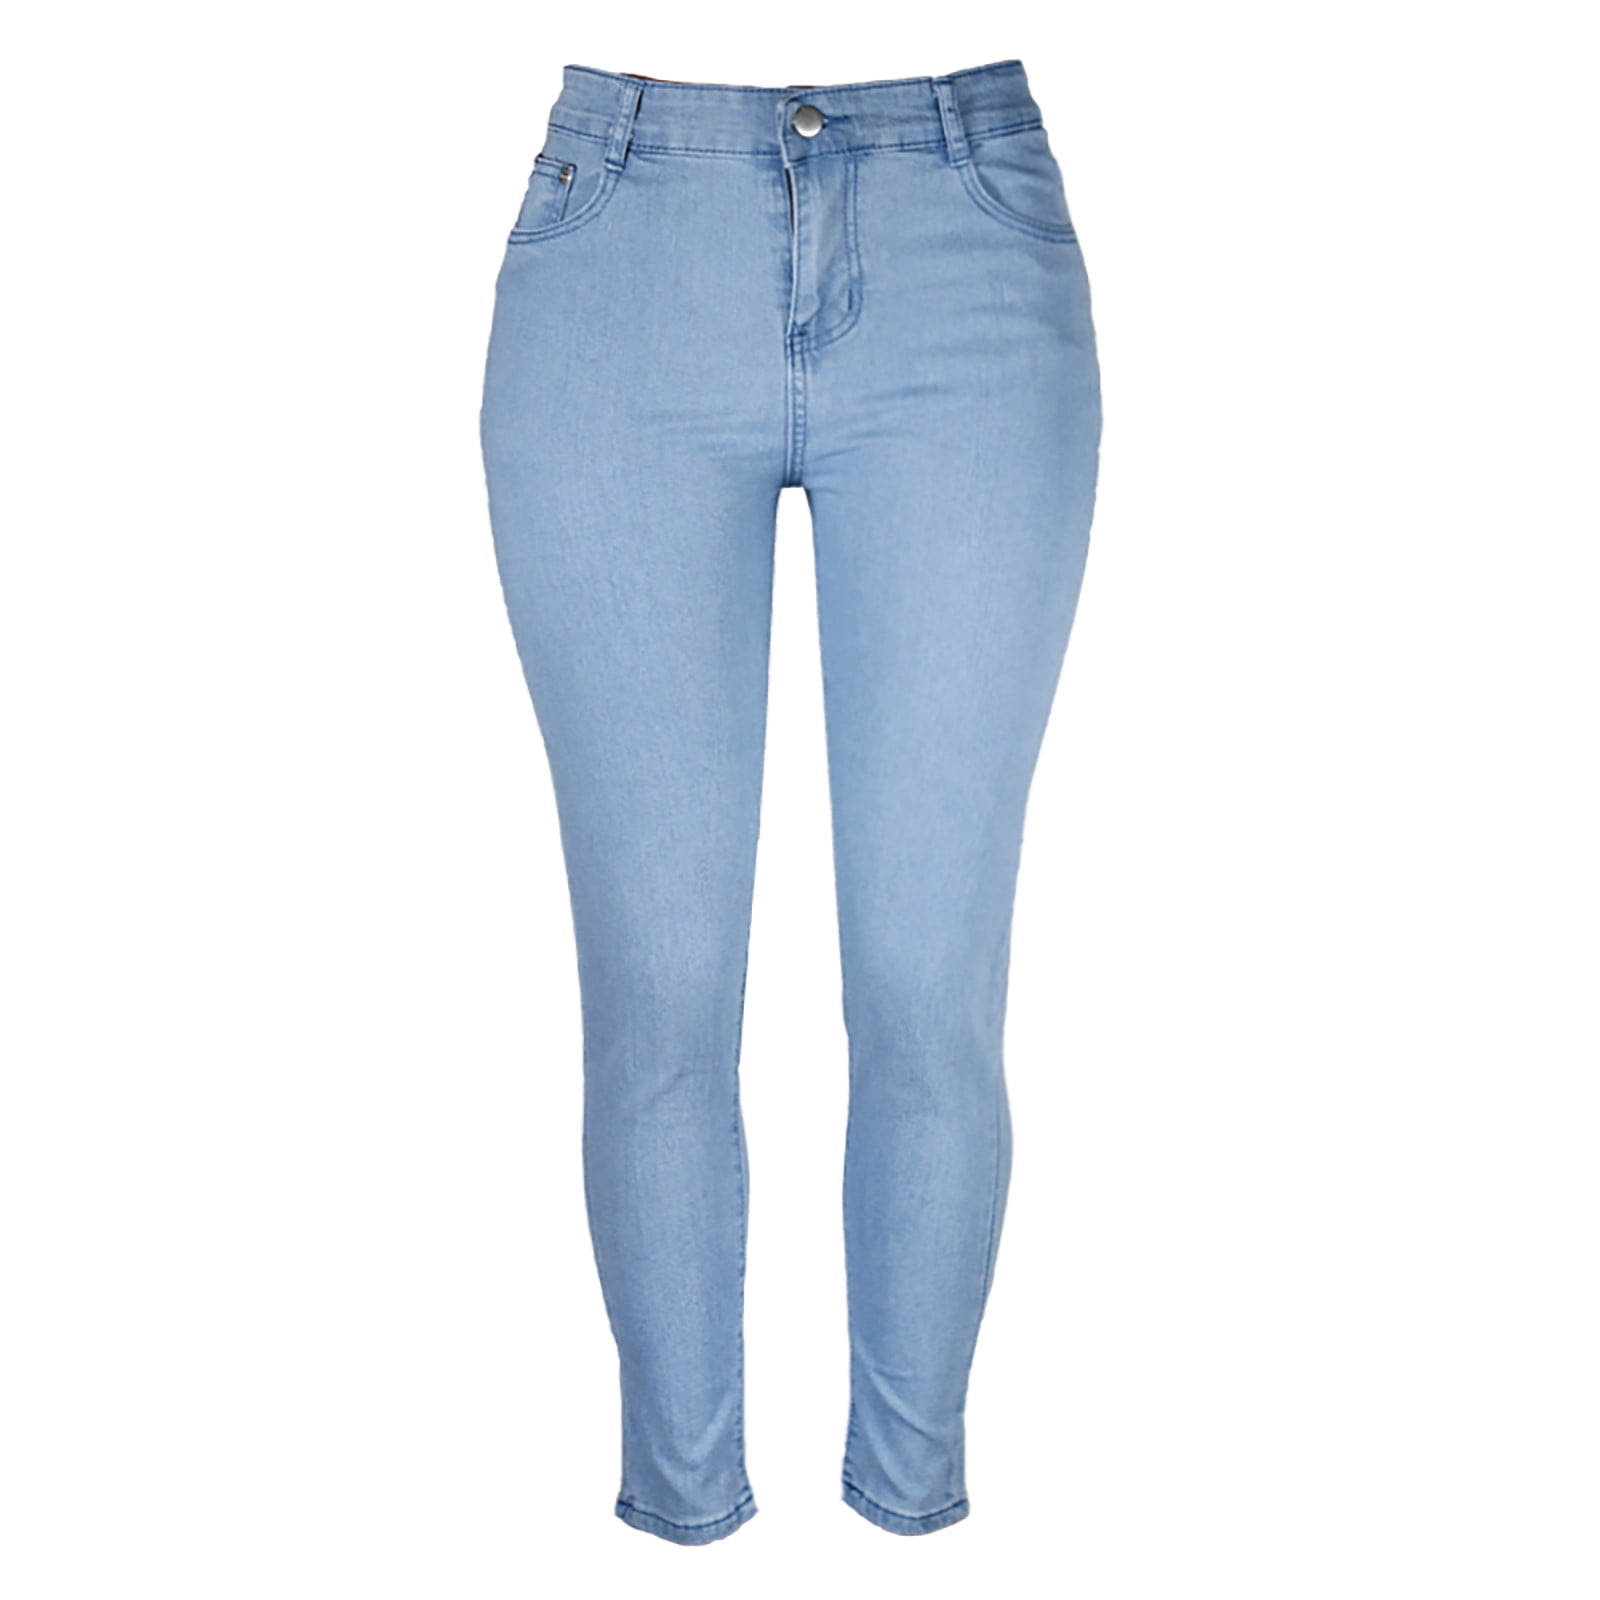 Leggings Elastic Cotton Exaggerated Big Holes High Waist Jeans Casual  Trousers Skinny Pencil Pants Female Ankle Jeans Plus Size From Prettyfaces,  $43.96